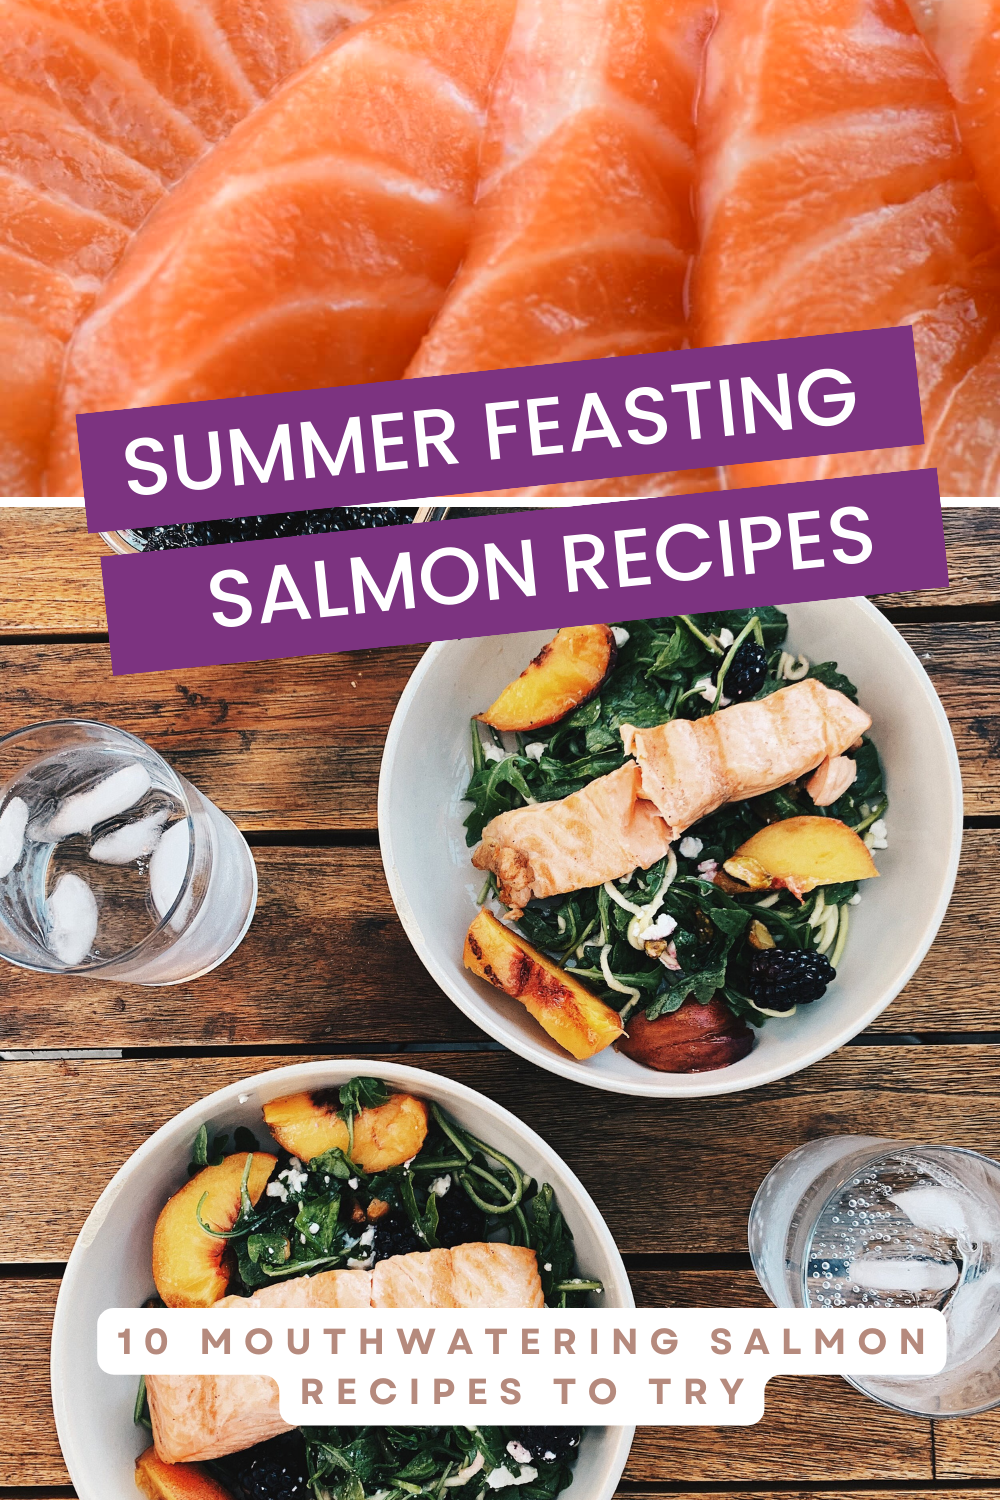 Summer Feasting 10 Mouthwatering Salmon Recipes to Try 1.png